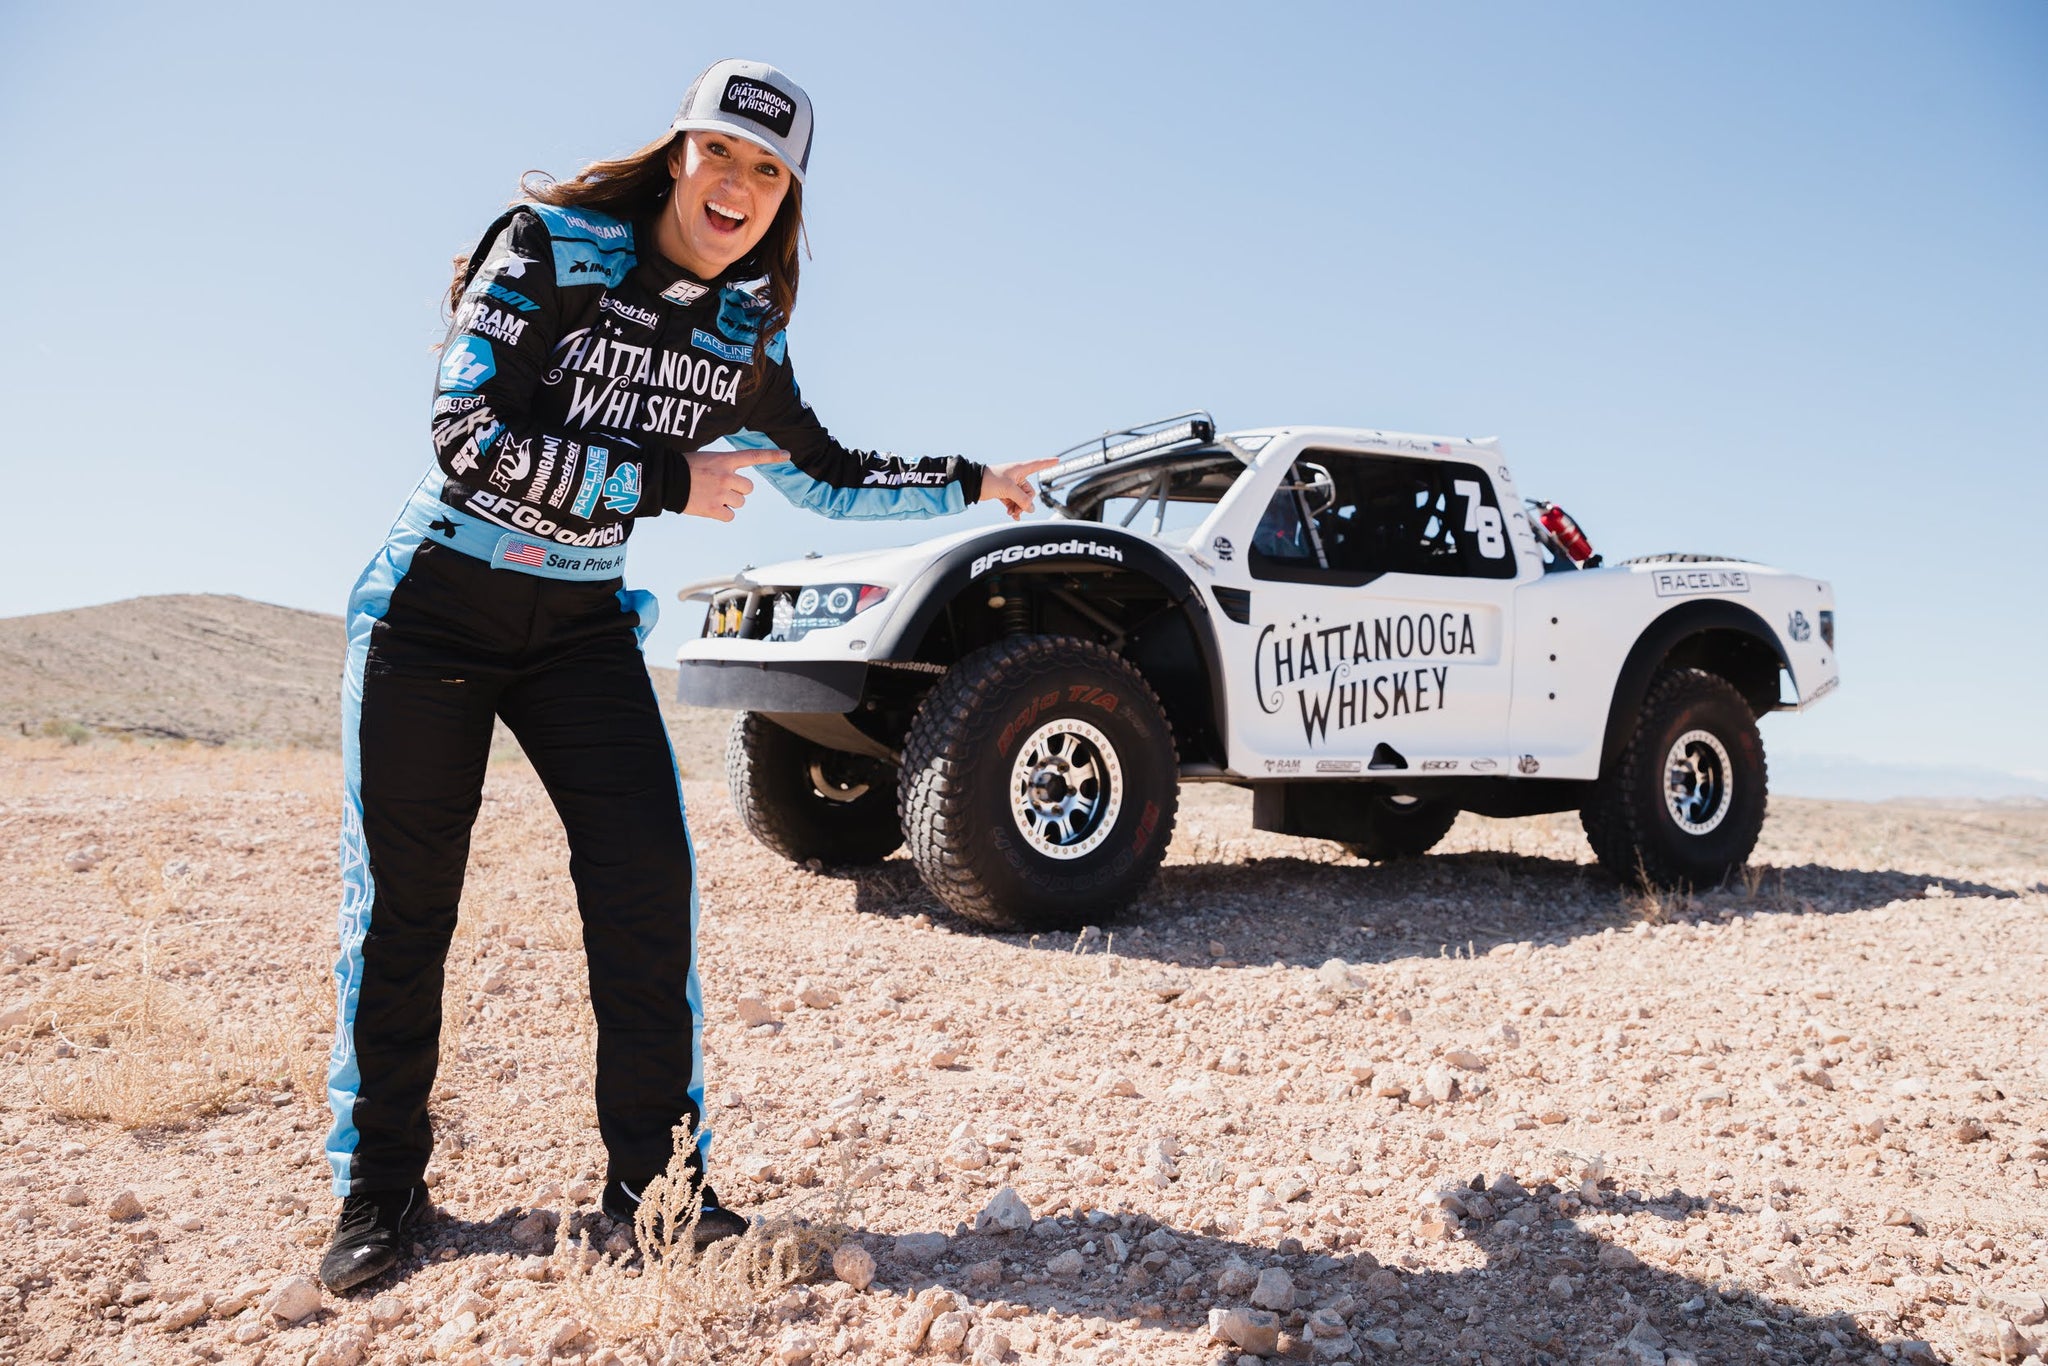 Sara Price to Make Trophy Truck Debut with Chattanooga Whiskey at the Prestigious Mint 400